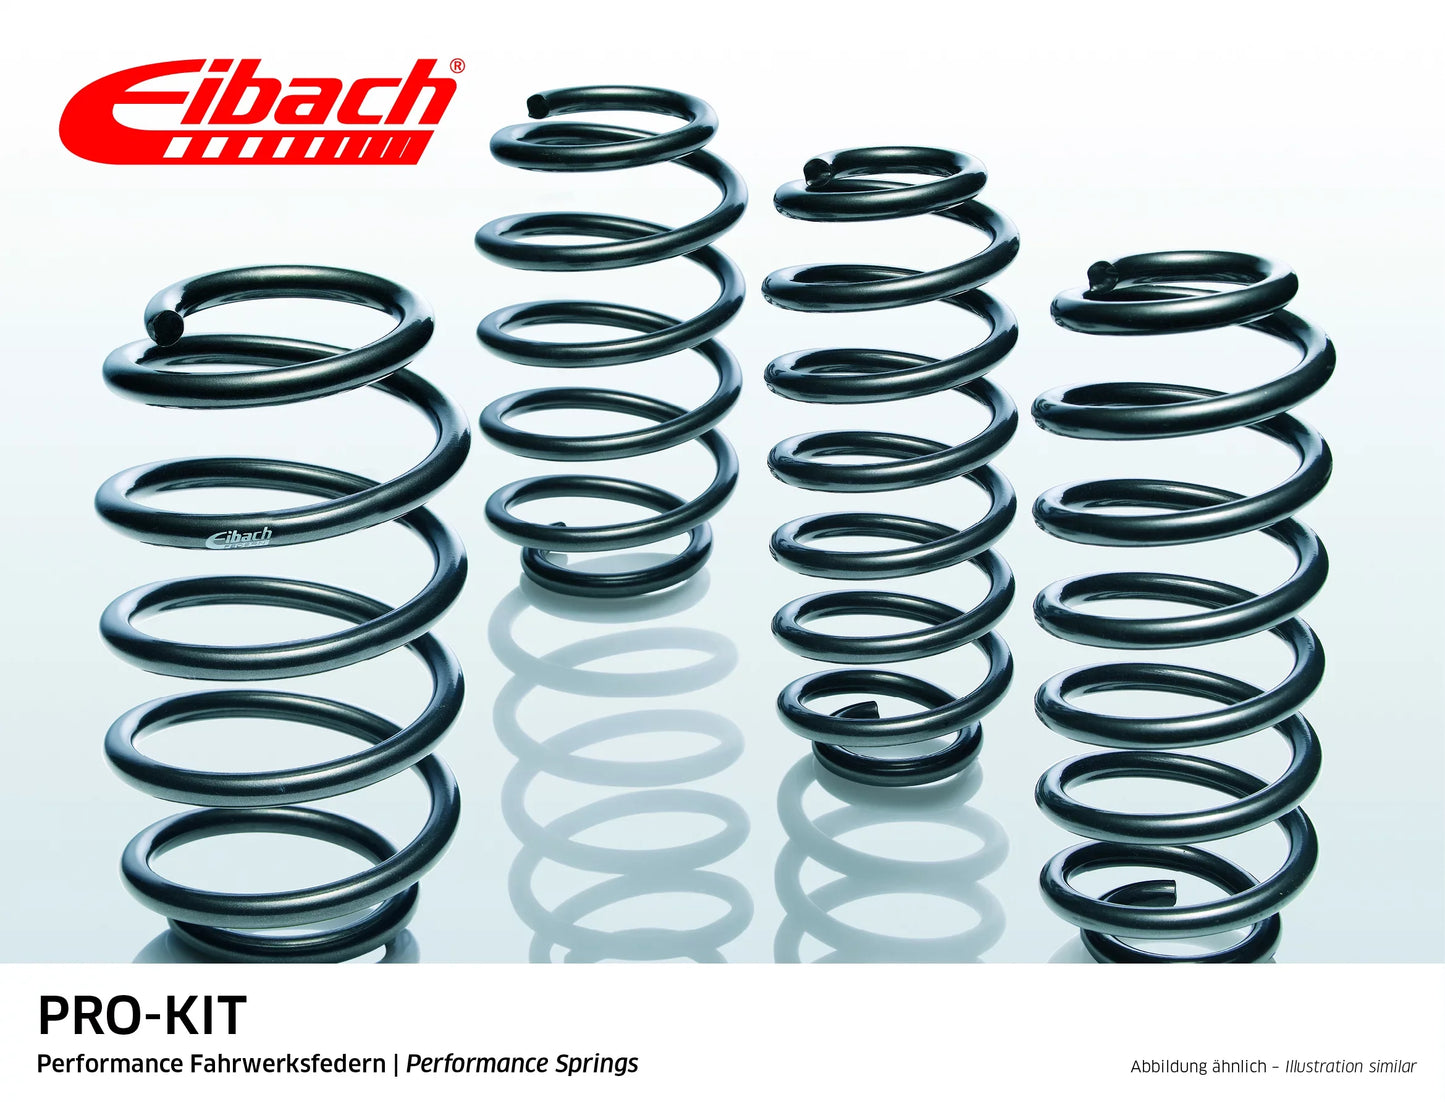 Eibach Pro-Kit Lowering Springs (E10-80-018-01-22) at £274.32